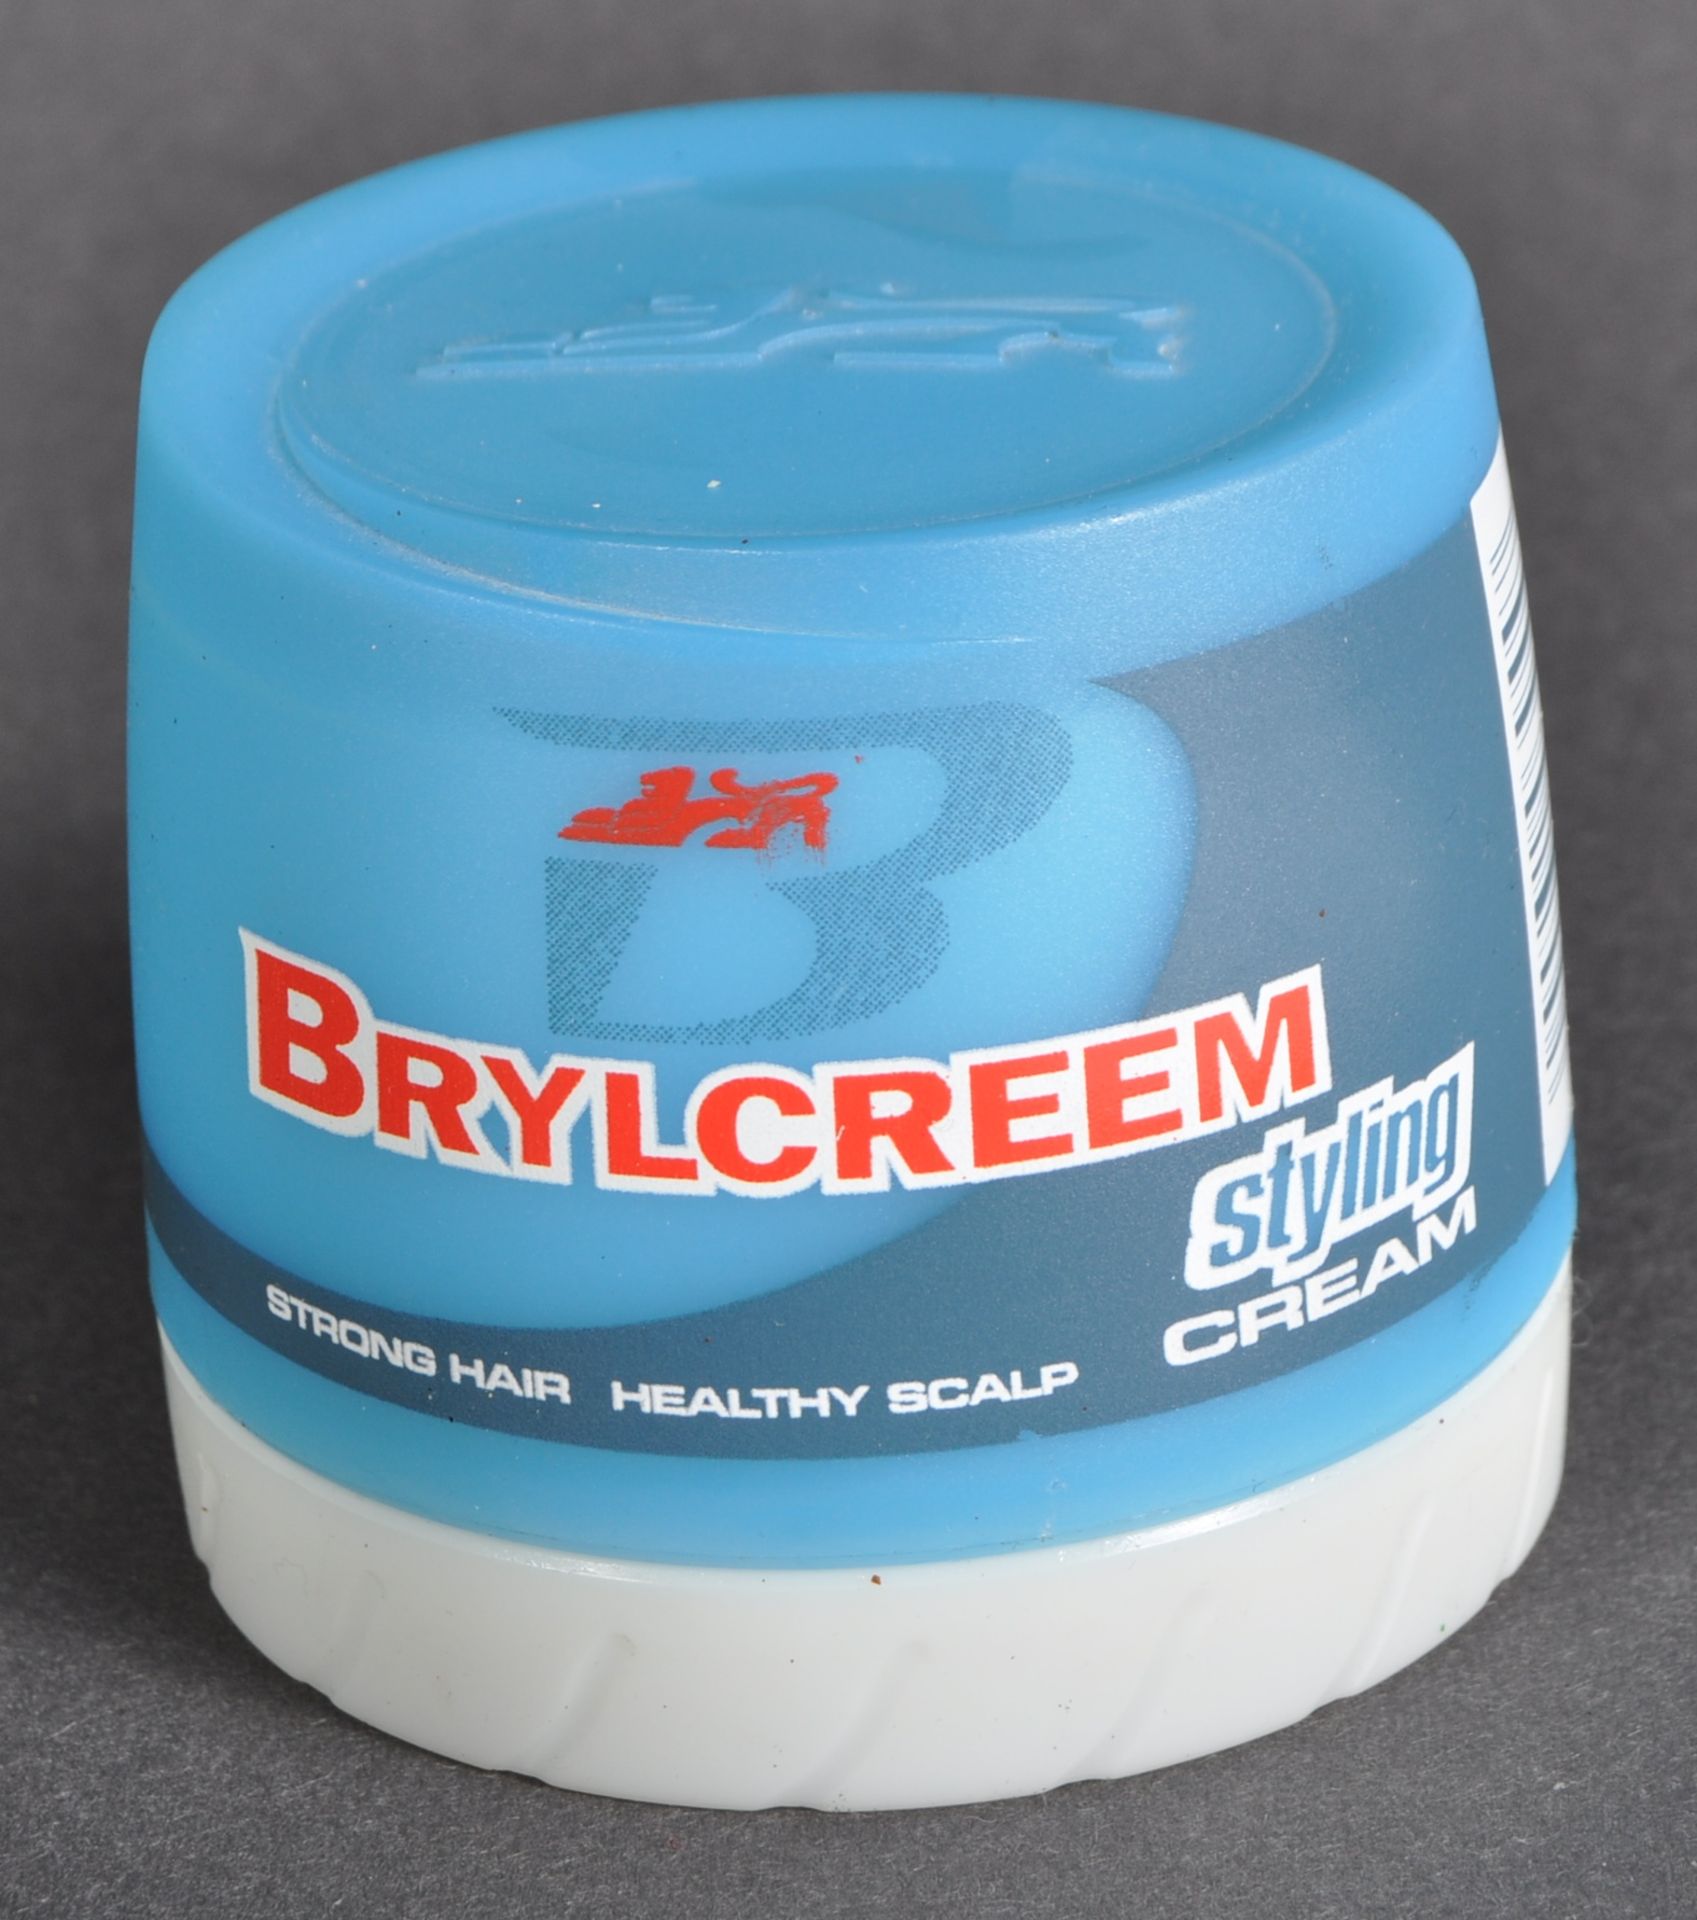 ONLY FOOLS & HORSES - STRANGERS ON THE SHORE - SCREEN USED PROP BRYLCREEM - Image 4 of 6